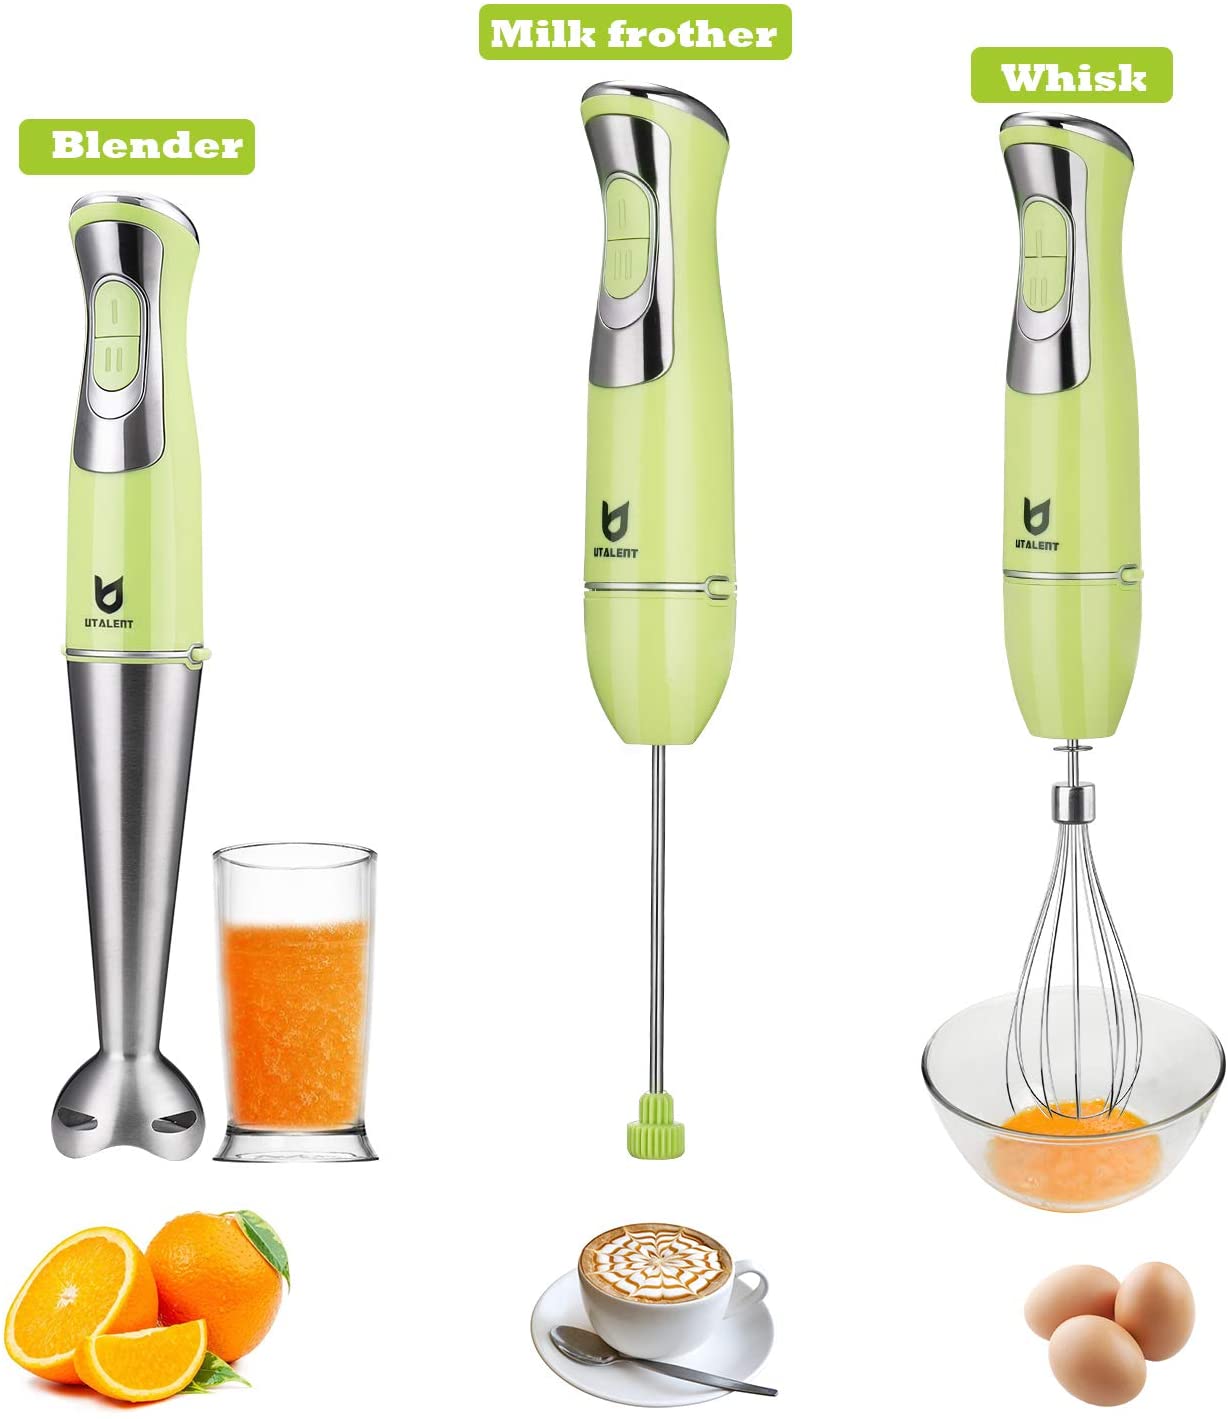 3 in 1 hand blender with milk frother and whisker